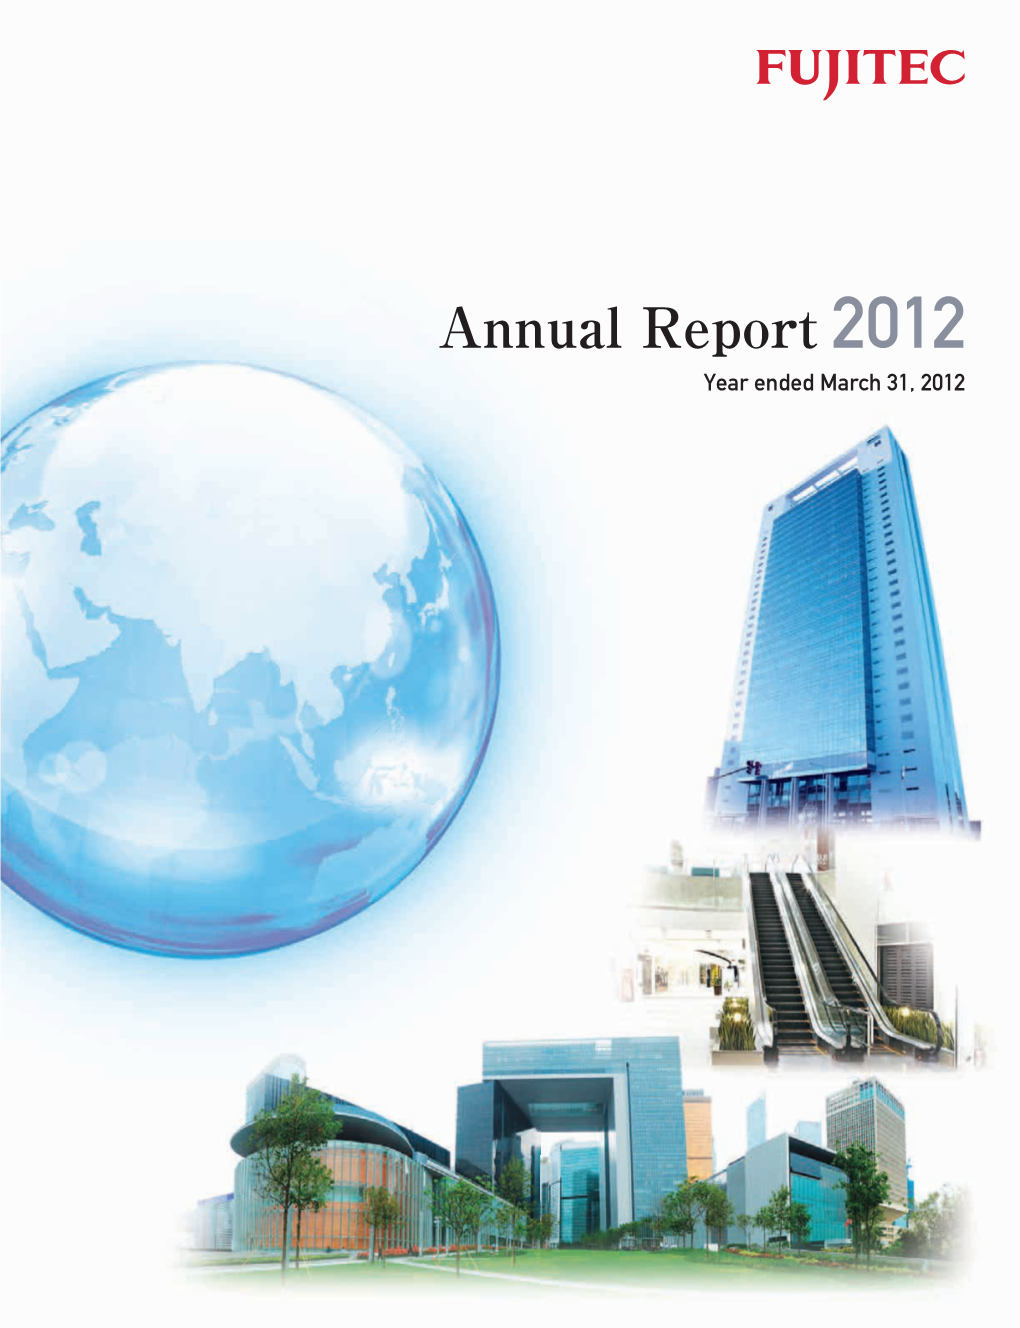 Annual Report 2012 Year Ended March 31, 2012 Mid-Term Management Plan “One Goal, One Fujitec” Unified As One, Aiming to Provide the Best Products and Services !